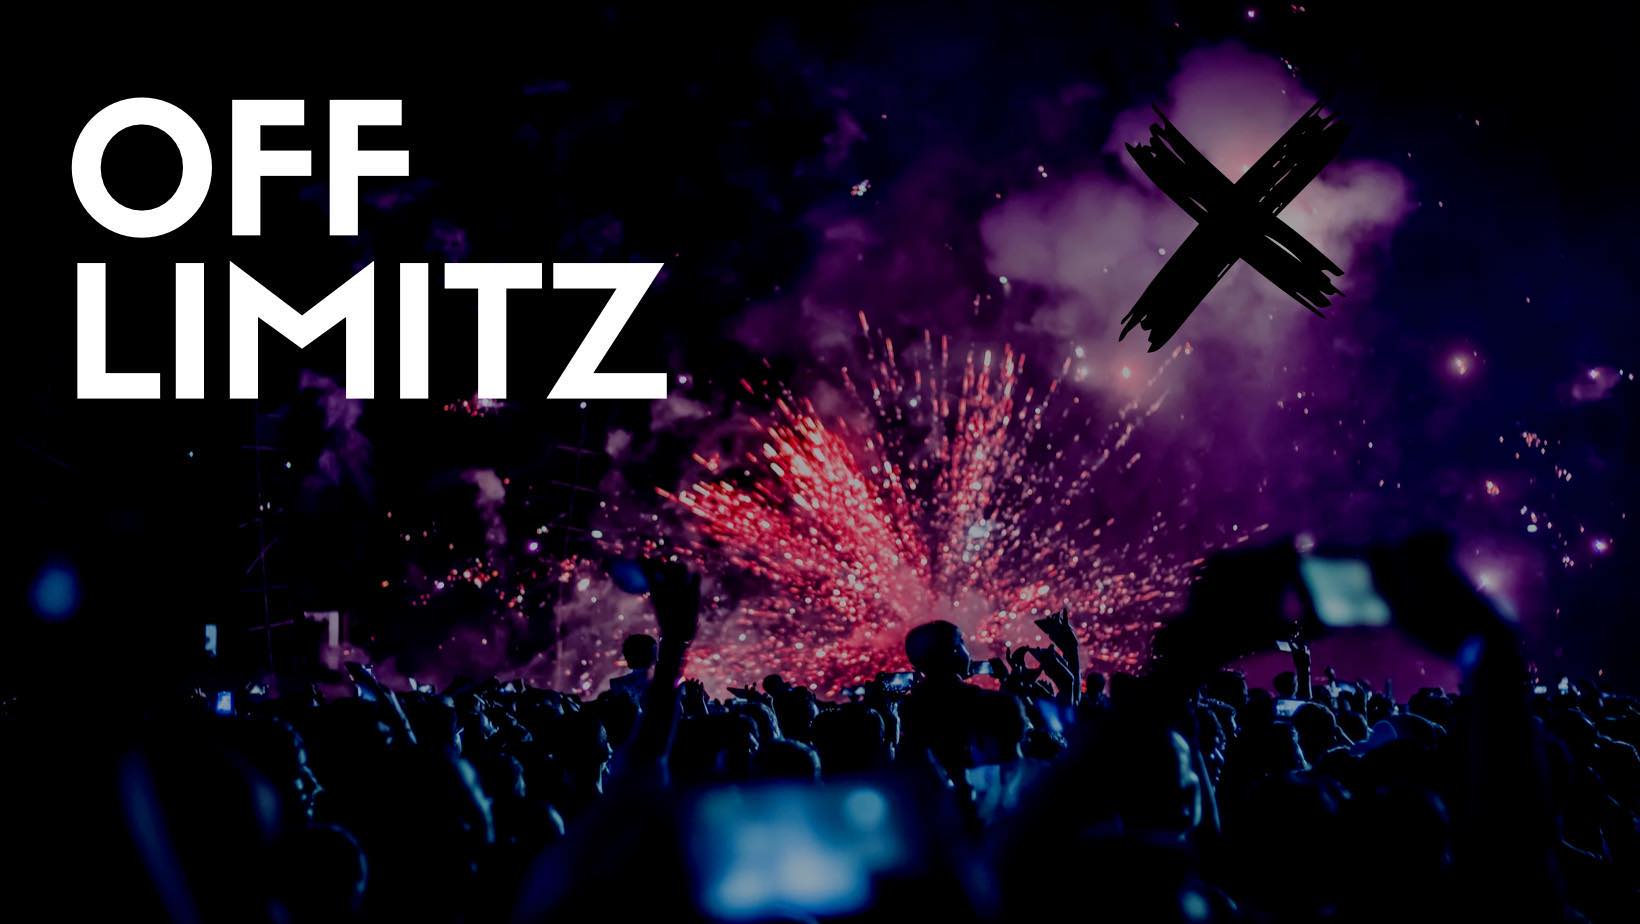 Off Limits text with fireworks and dark background.